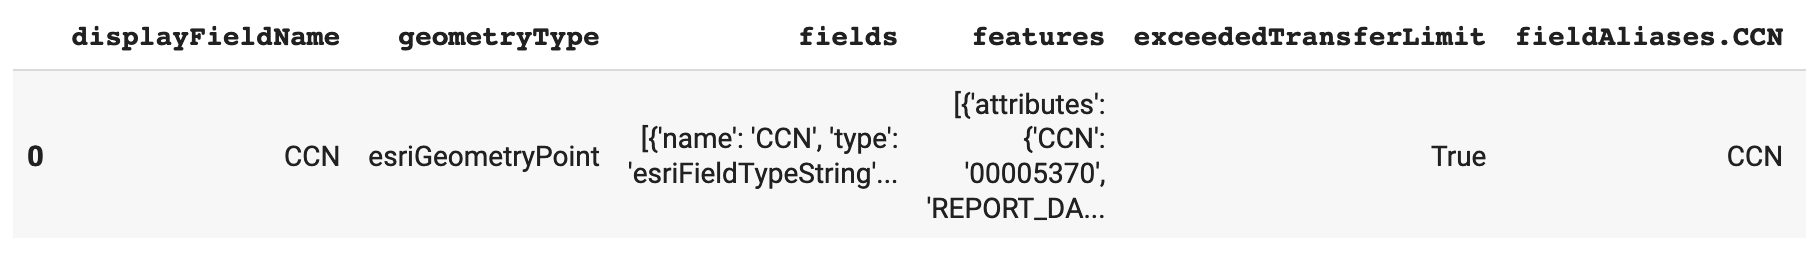 Underwhelming result when reading JSON to Pandas DataFrame. A single row is produced with no actual data and only headers. This is solved by reading the proper level of data.